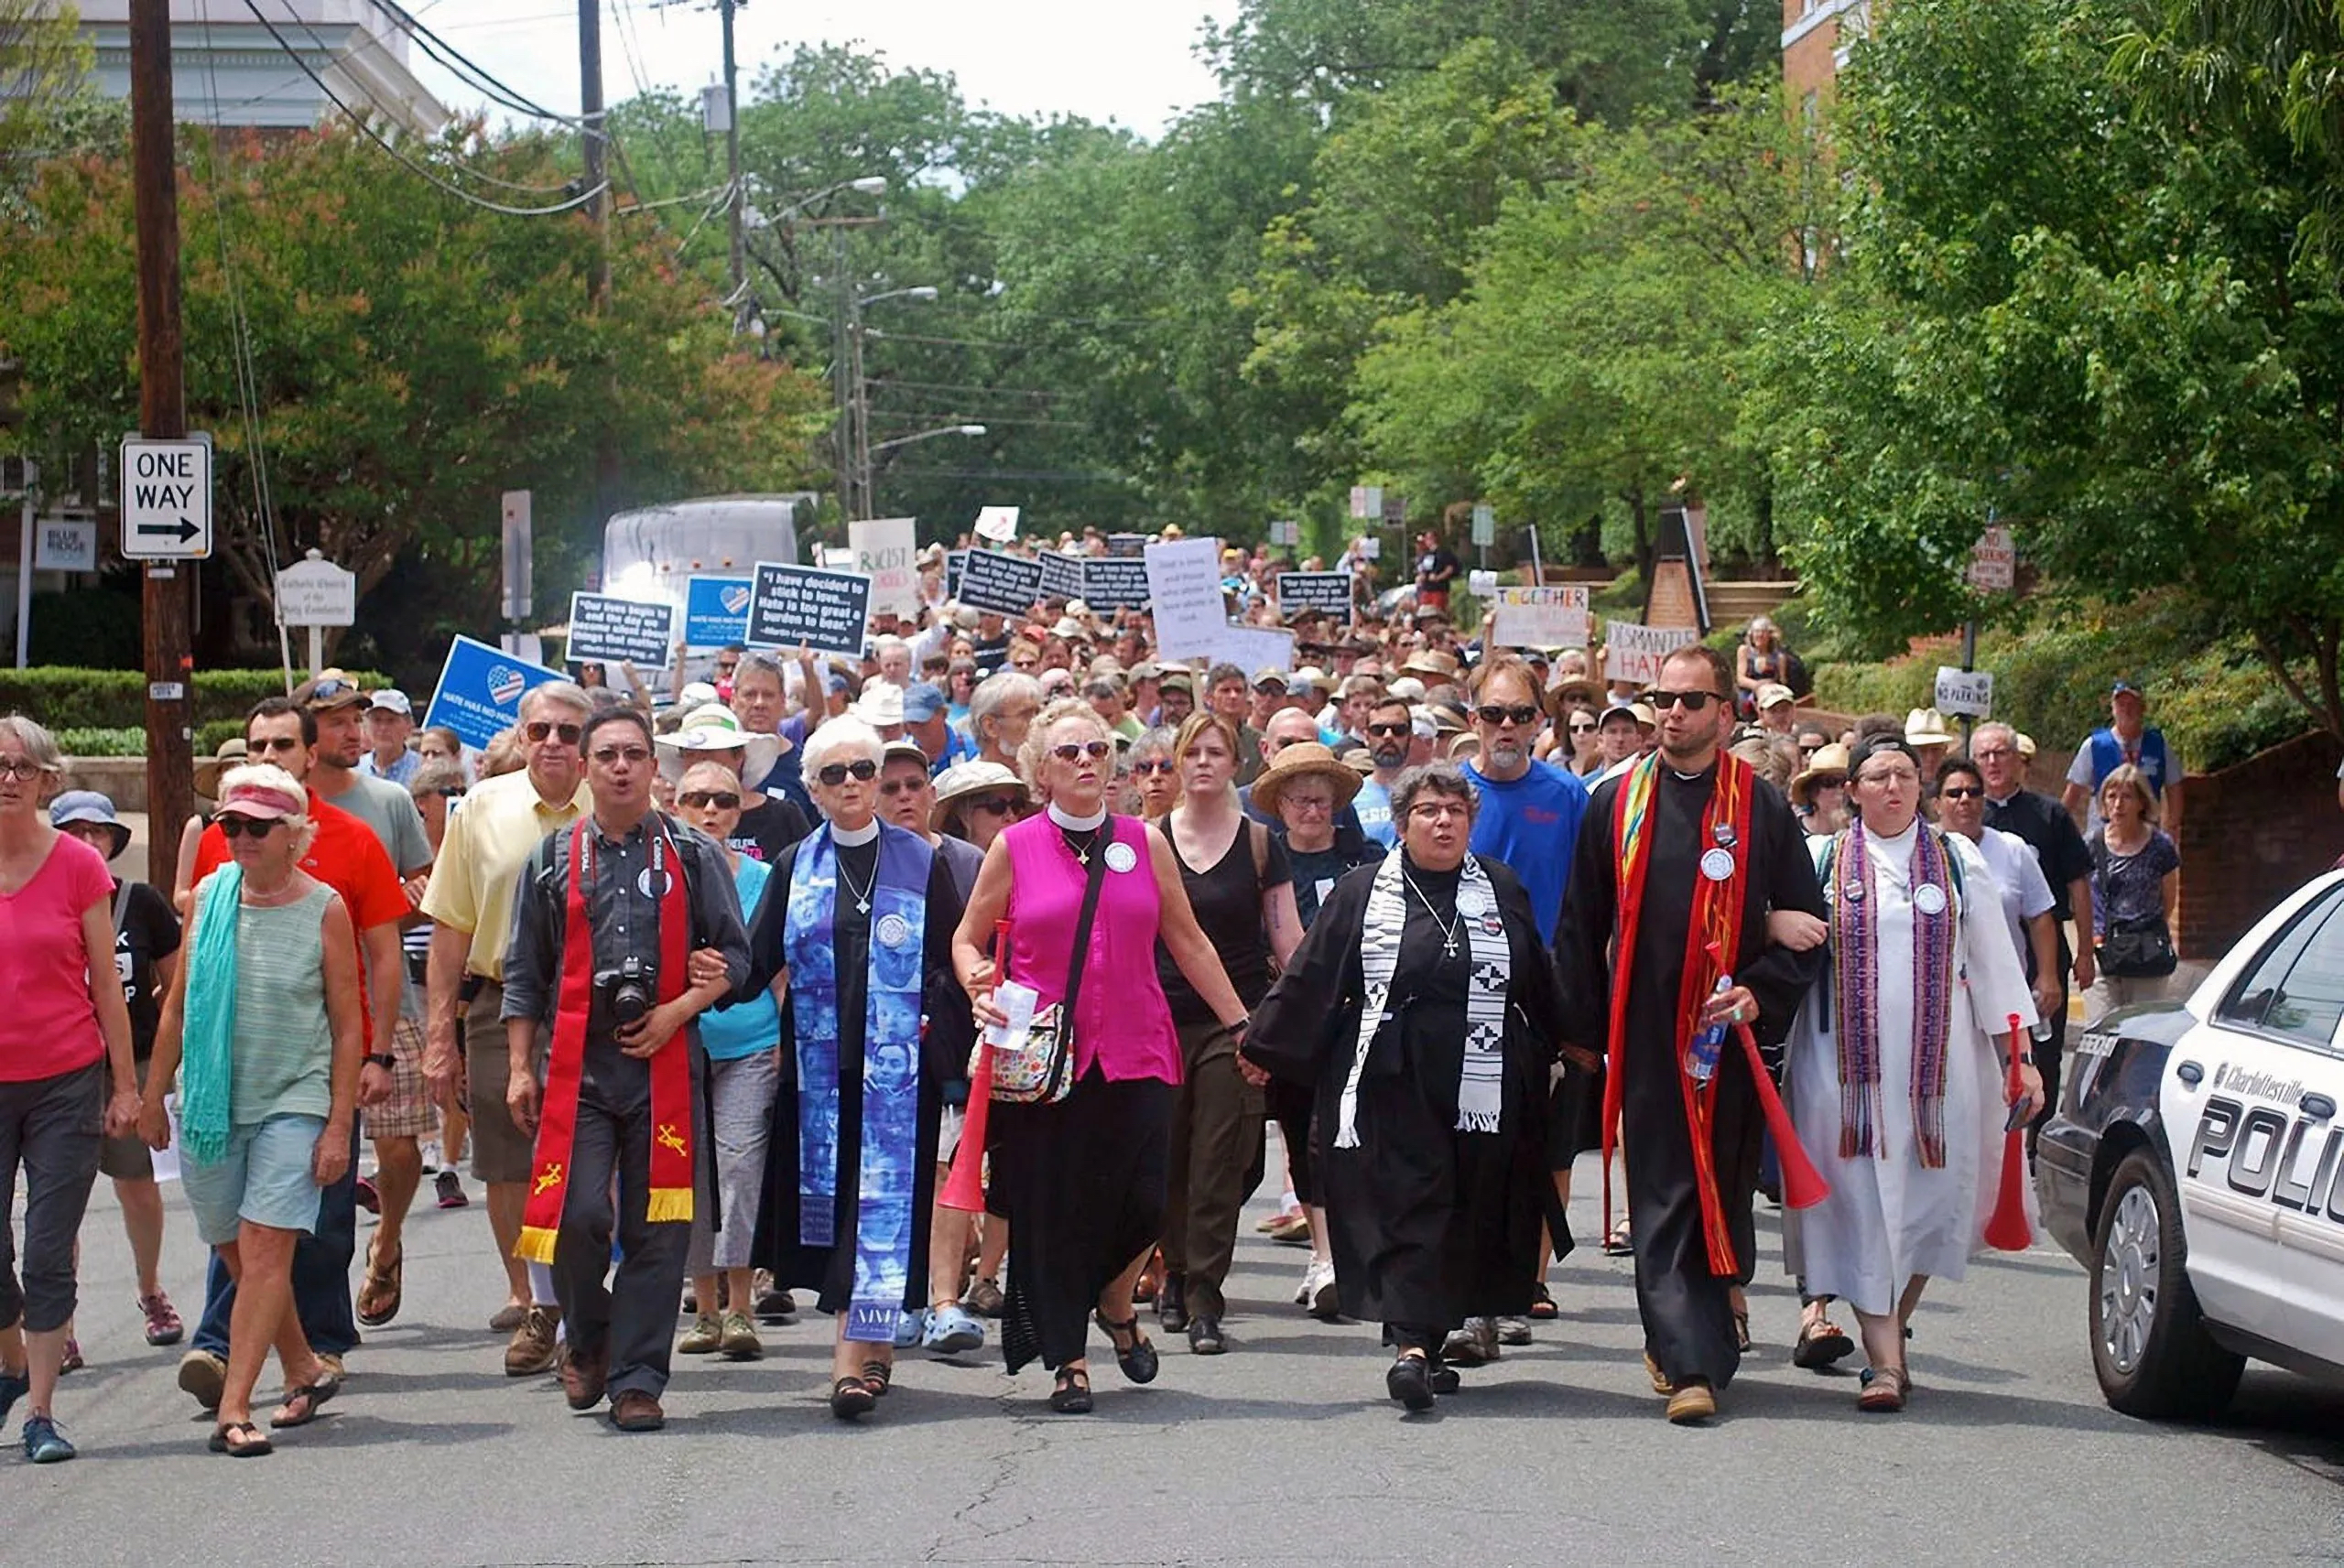 A group of faith leaders march ahead of a crowd down a street